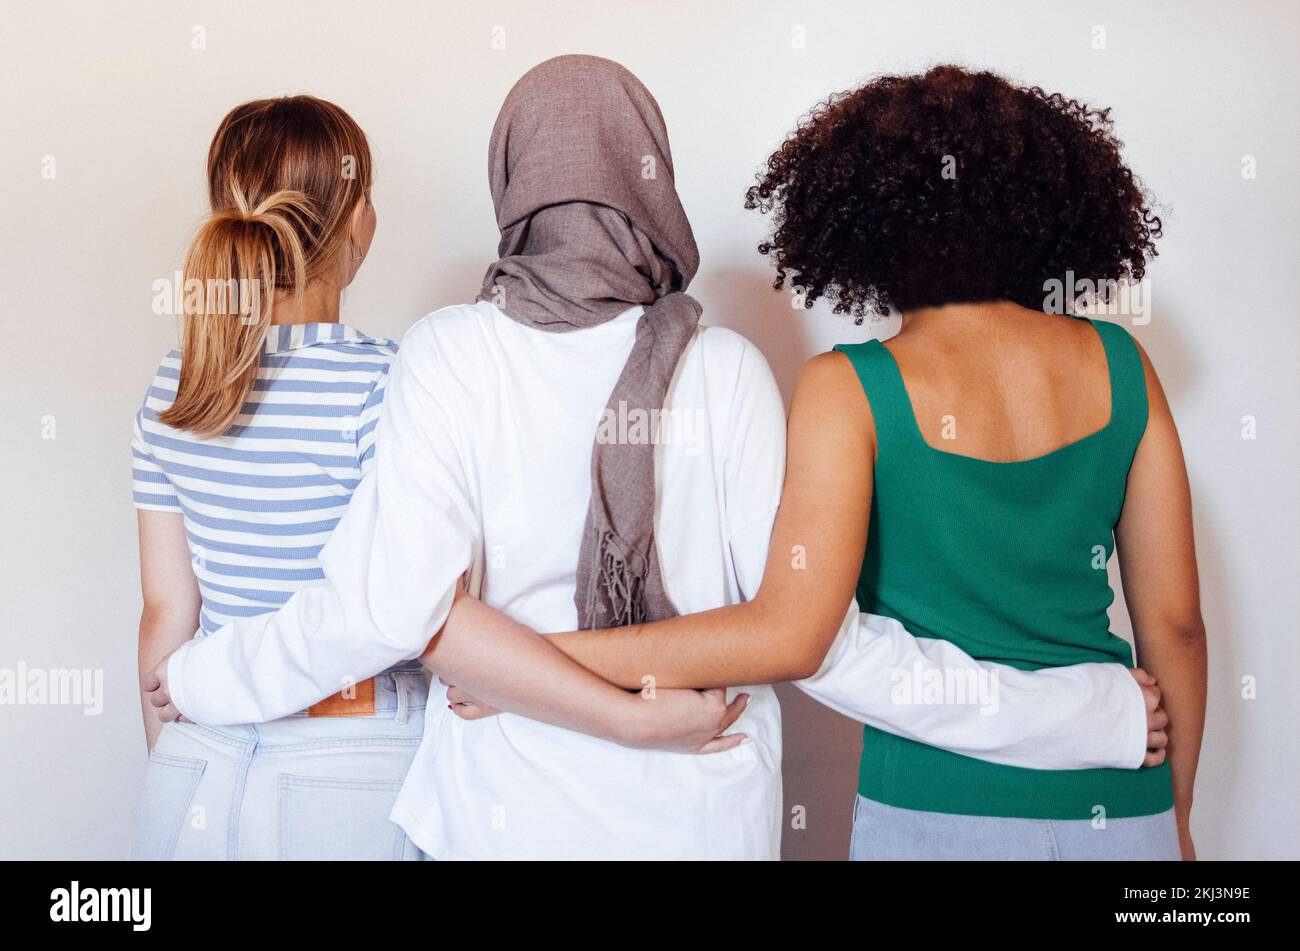 Strong female friendship. Rear view ttree teen girls best friends holding hands behind back and hugging while standing in front of beige wall outdoors Stock Photo